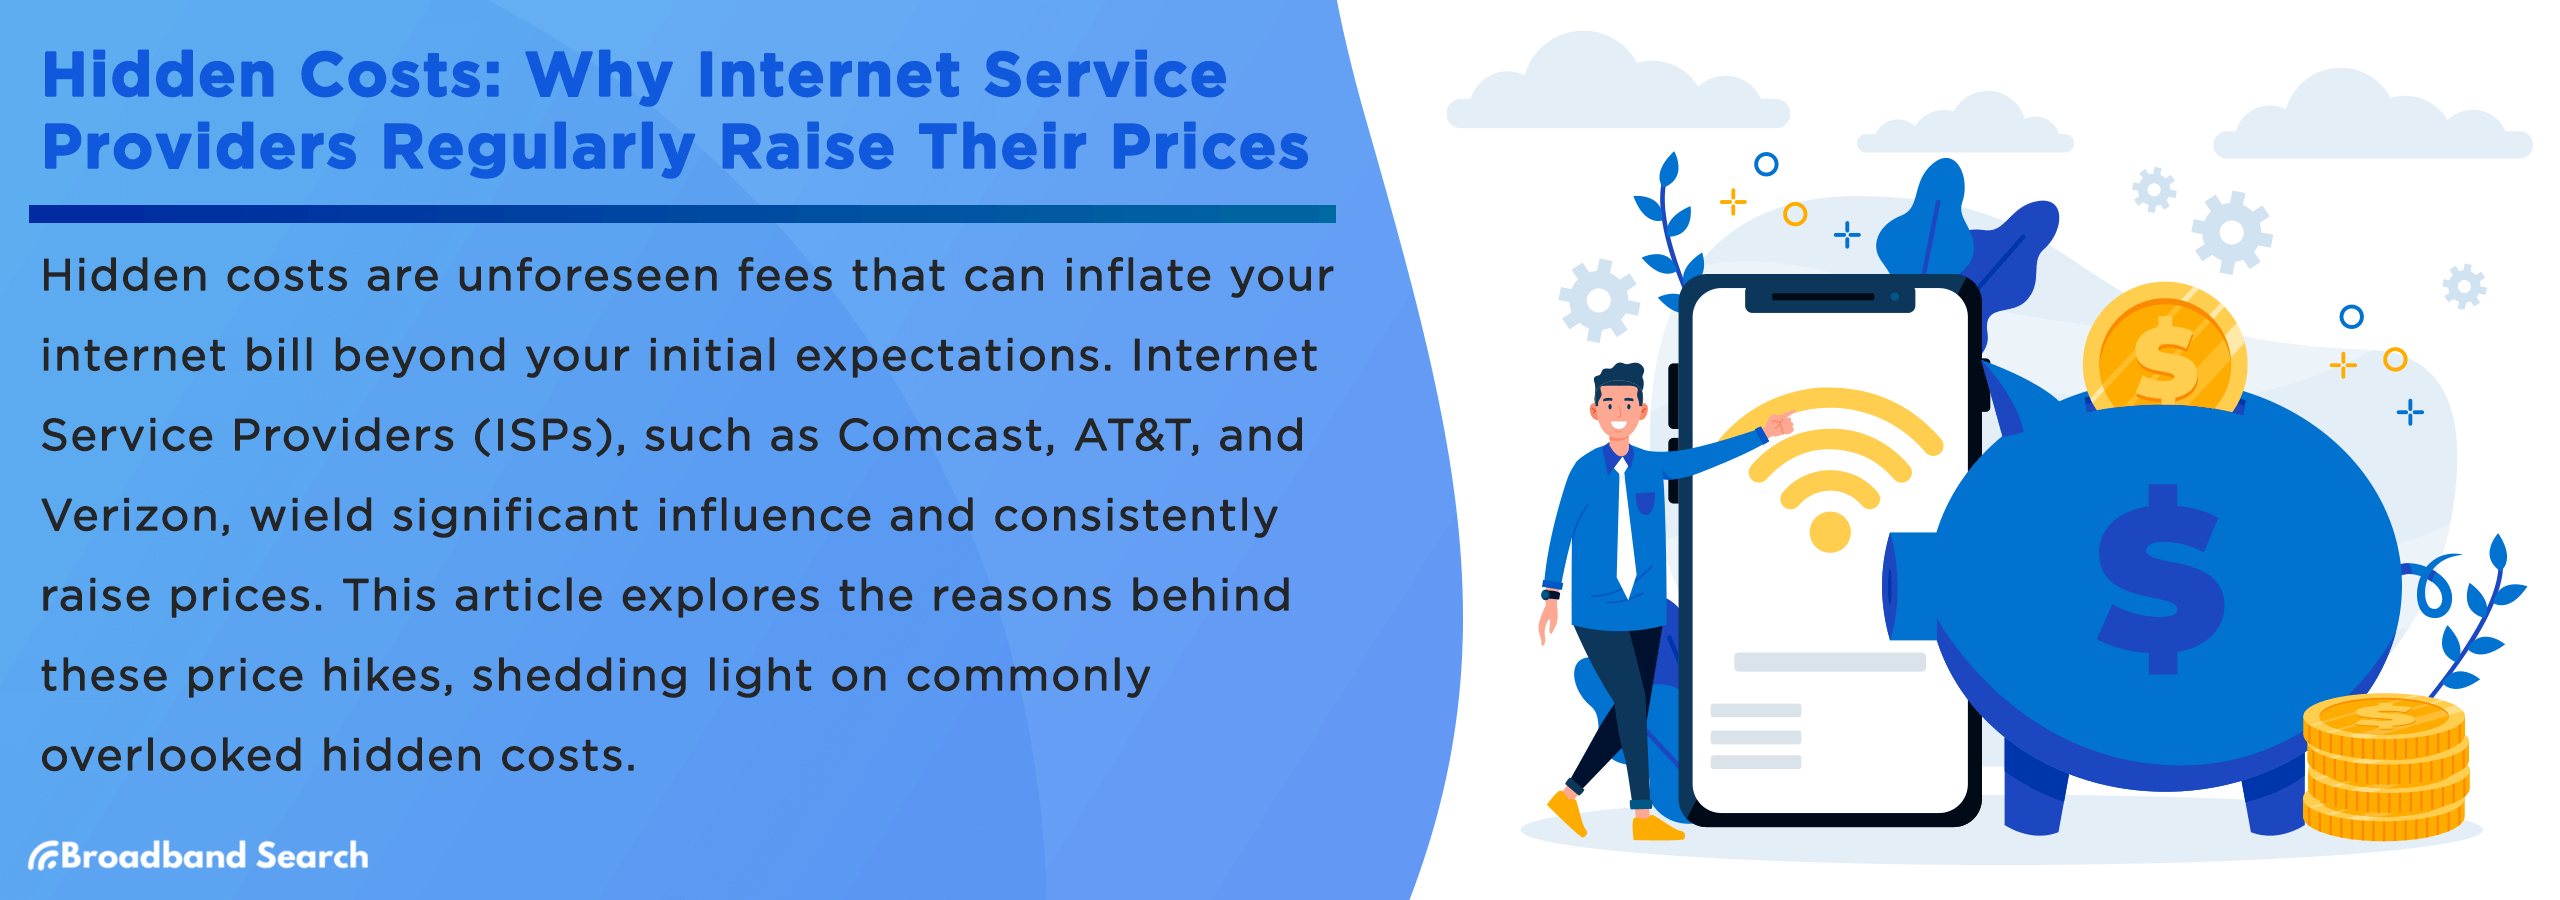 Hidden Costs: Why Internet Service Providers Regularly Raise Their Prices